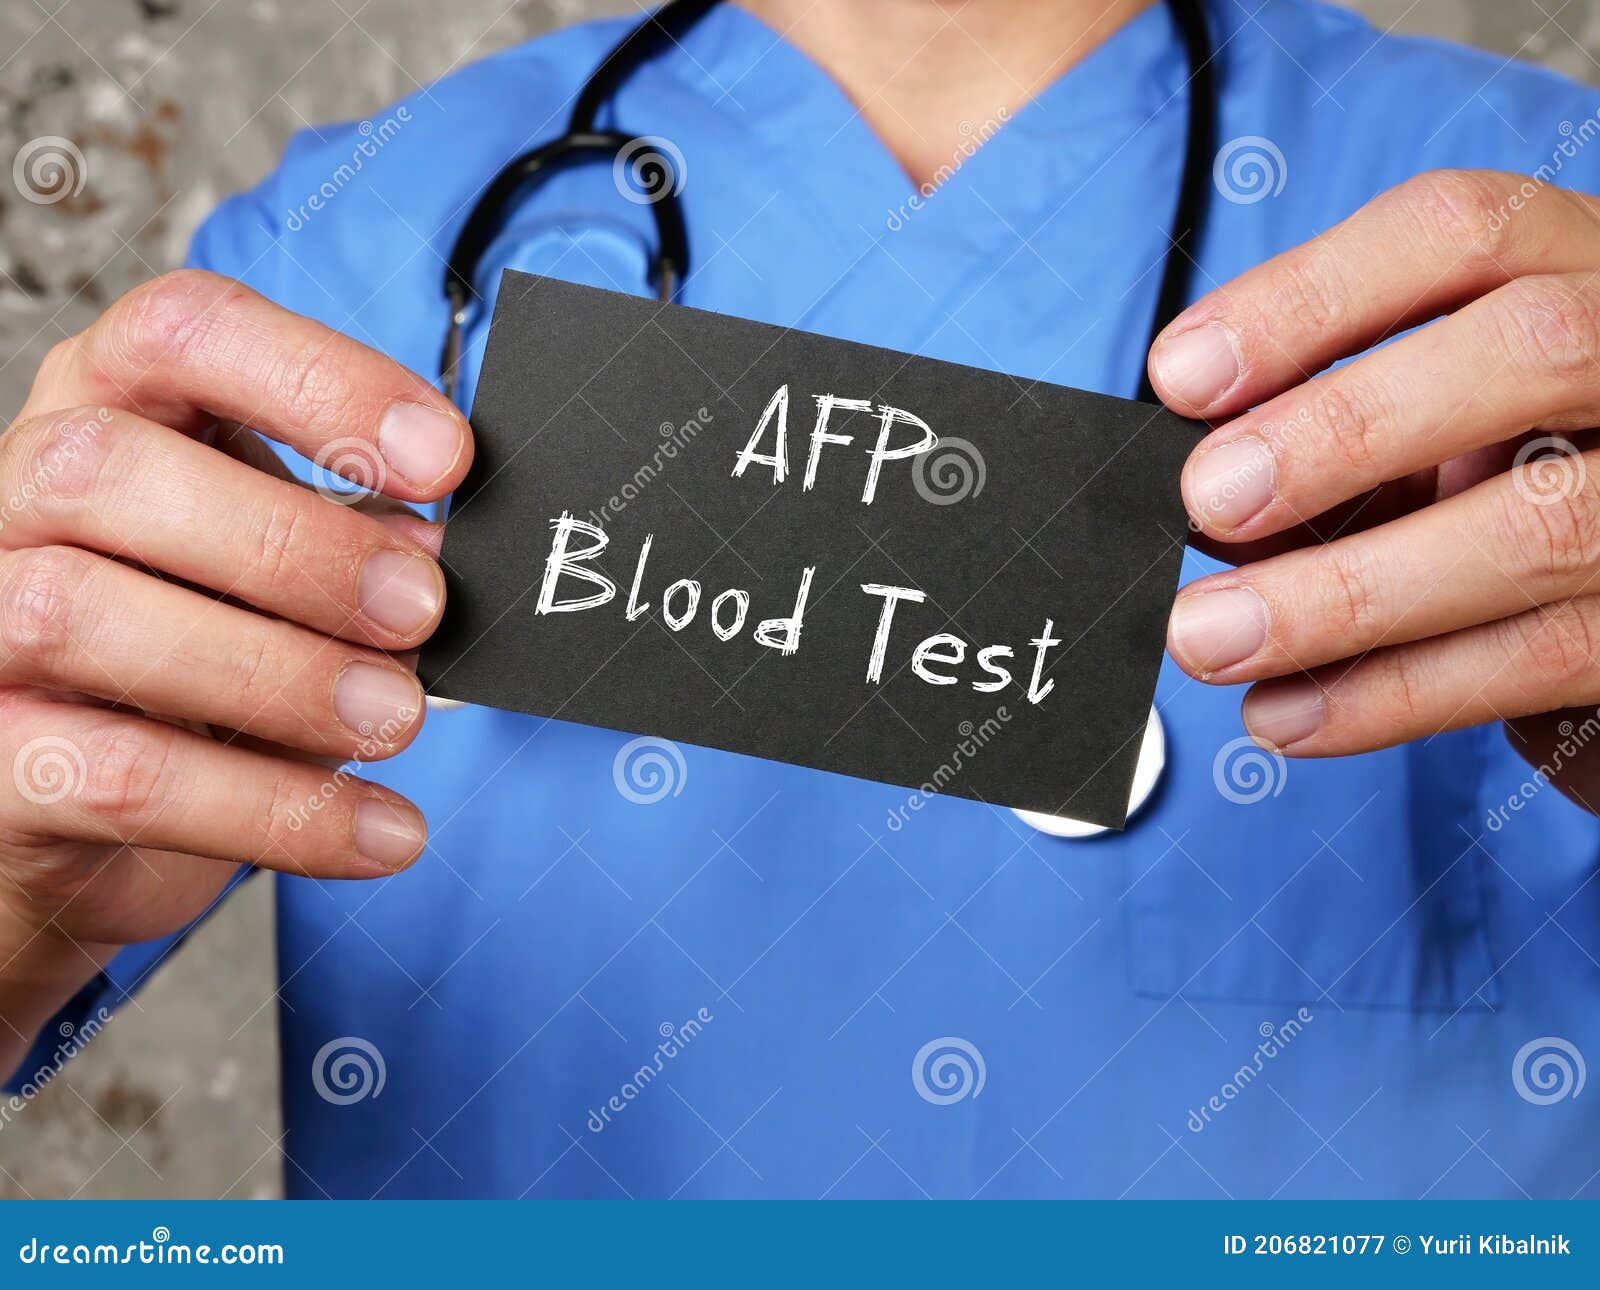 health care concept meaning alpha-fetoprotein blood test afp blood test with inscription on the page